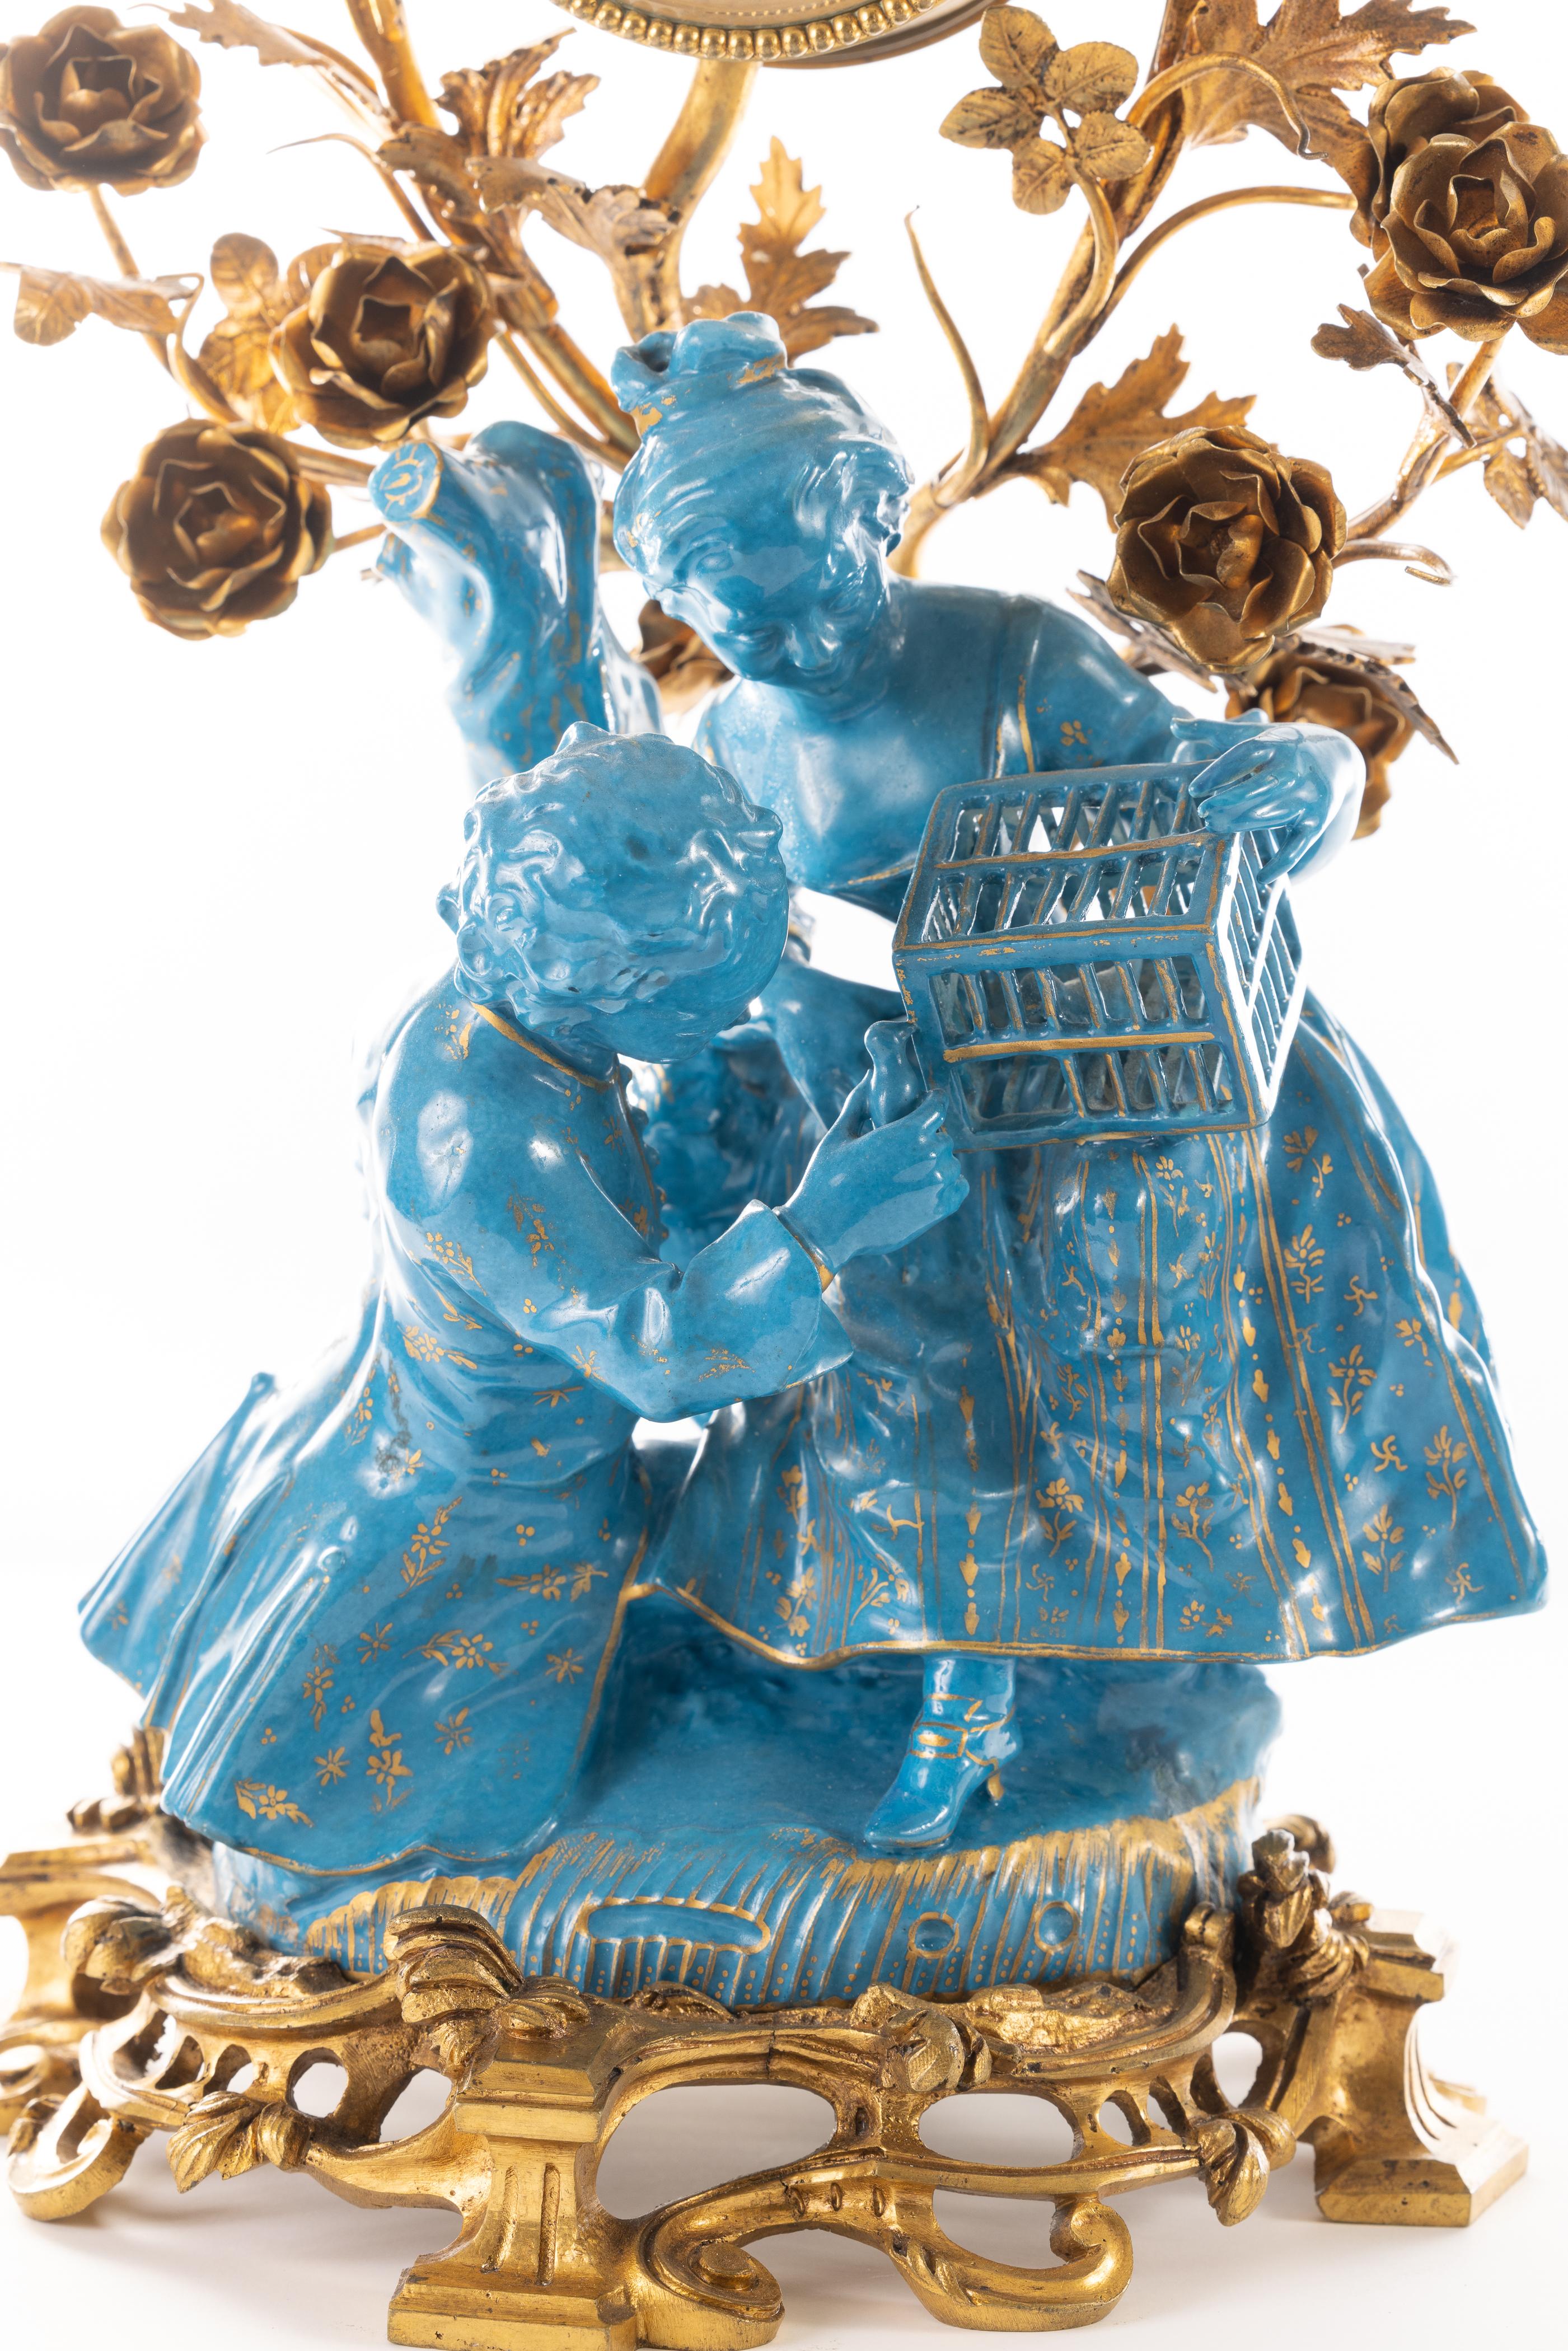 Elegant 19th Century French Clock with gilt turquoise porcelain figures of a young man and woman with a caged bird. The porcelain figurine is in good condition with all fingers intact. The porcelain is numbered on the underside but does not appear